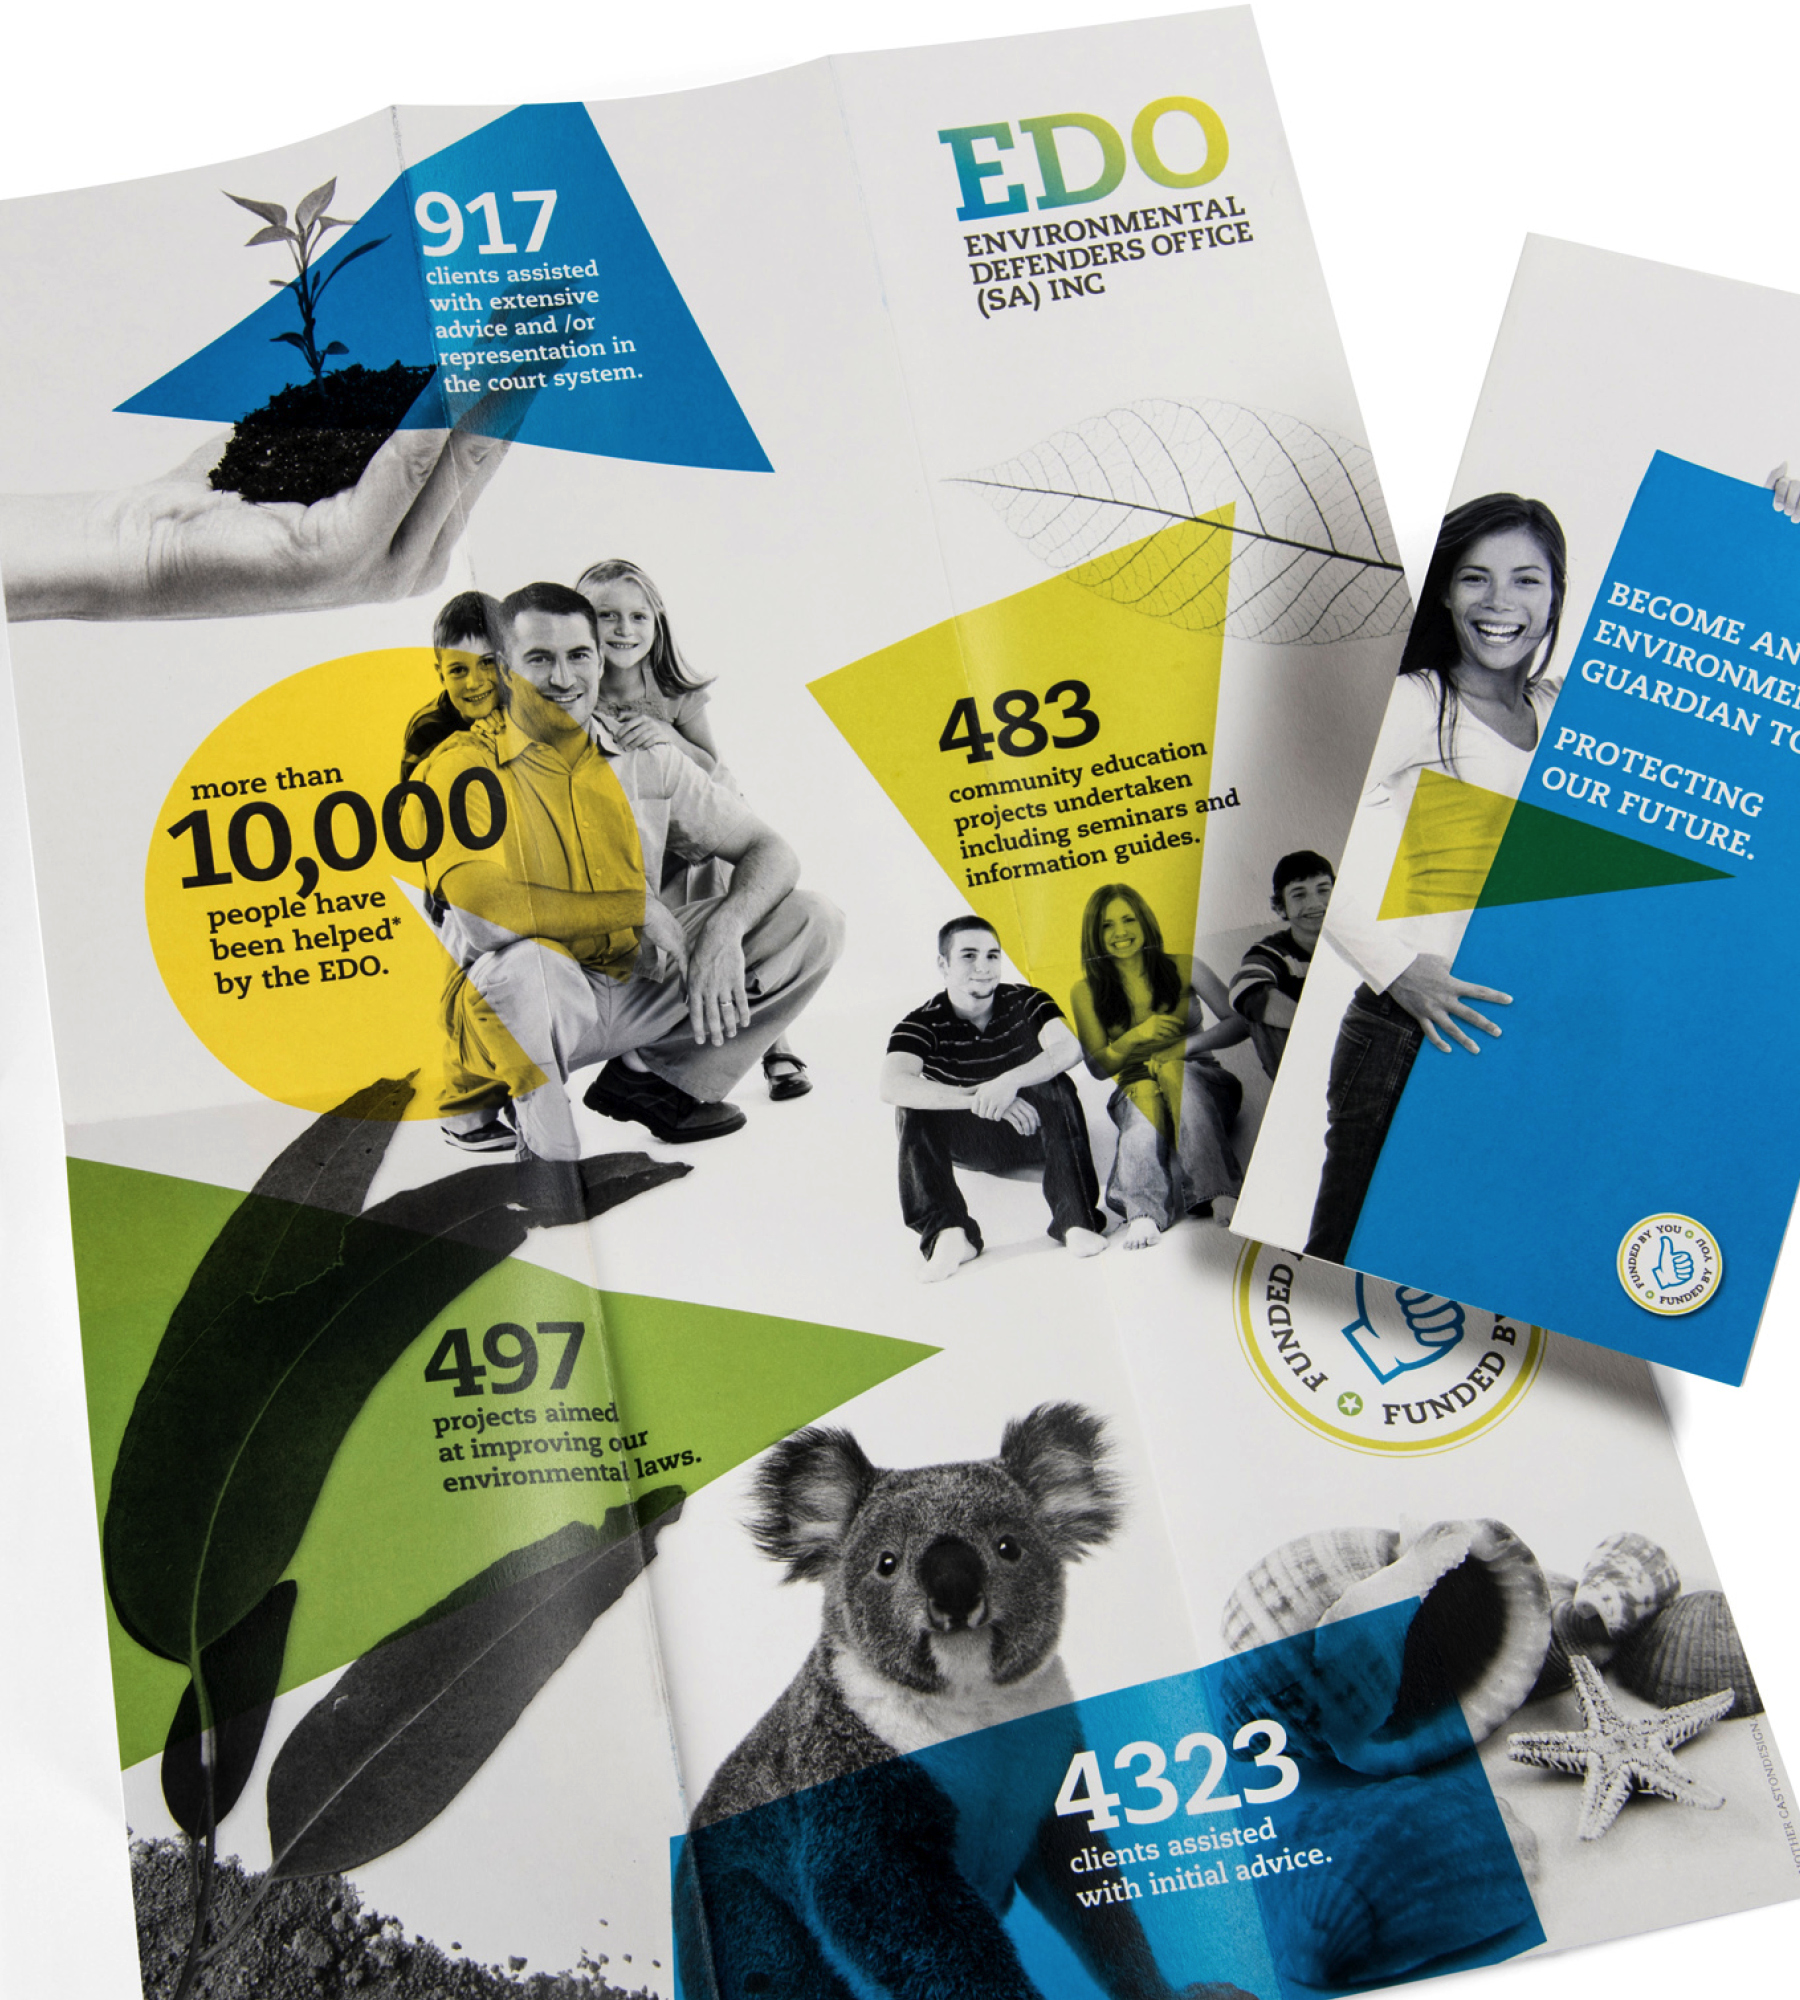 EDO (Environmental Defenders Office SA) - Connecting clients with a cause. Together we developed a series of print and online campaigns that included postcards, posters and electronic direct mail. Overall results saw a 60 percent increase in community awareness, positive perceptions and an increased uptake of services.